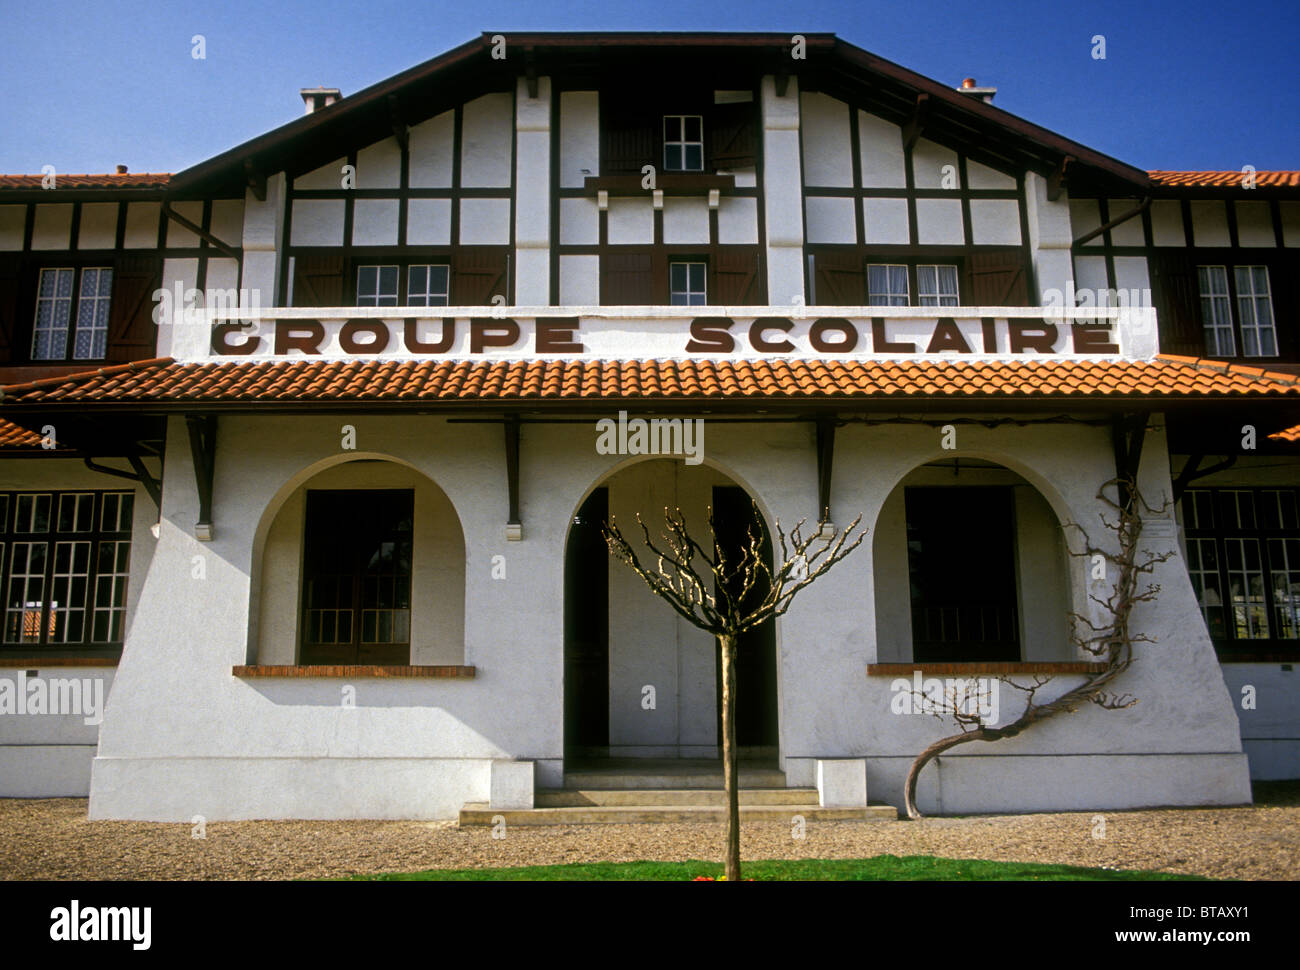 School groupe scolaire in the town of Saint-Vincent-de-Tyrosse Aquitaine region France Europe Stock Photo